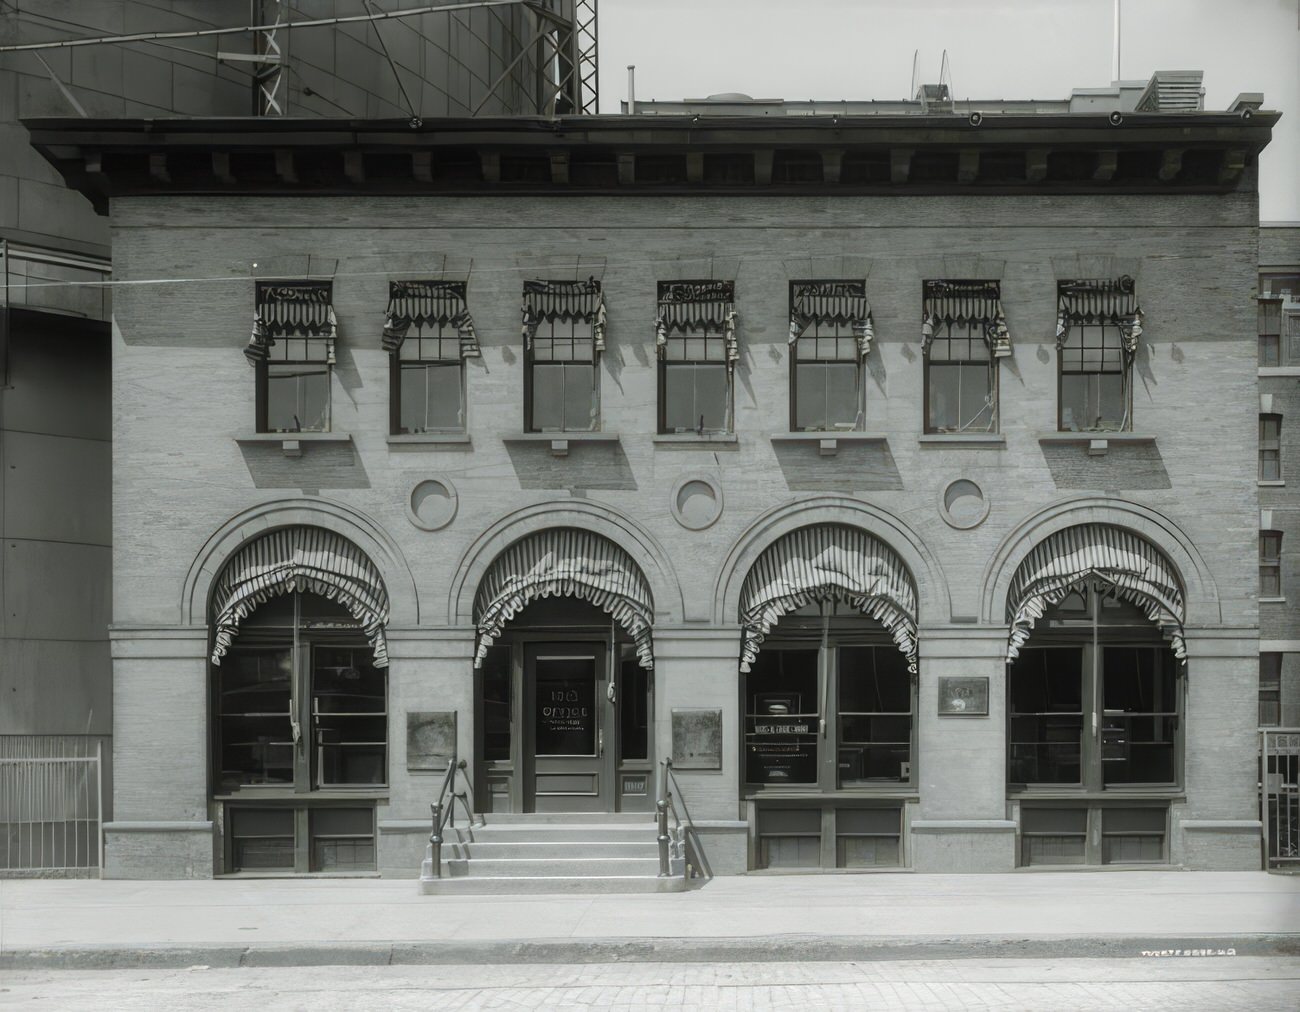 1815 Webster Avenue, Northern Union Gas Co. Storefront, Circa 1915.